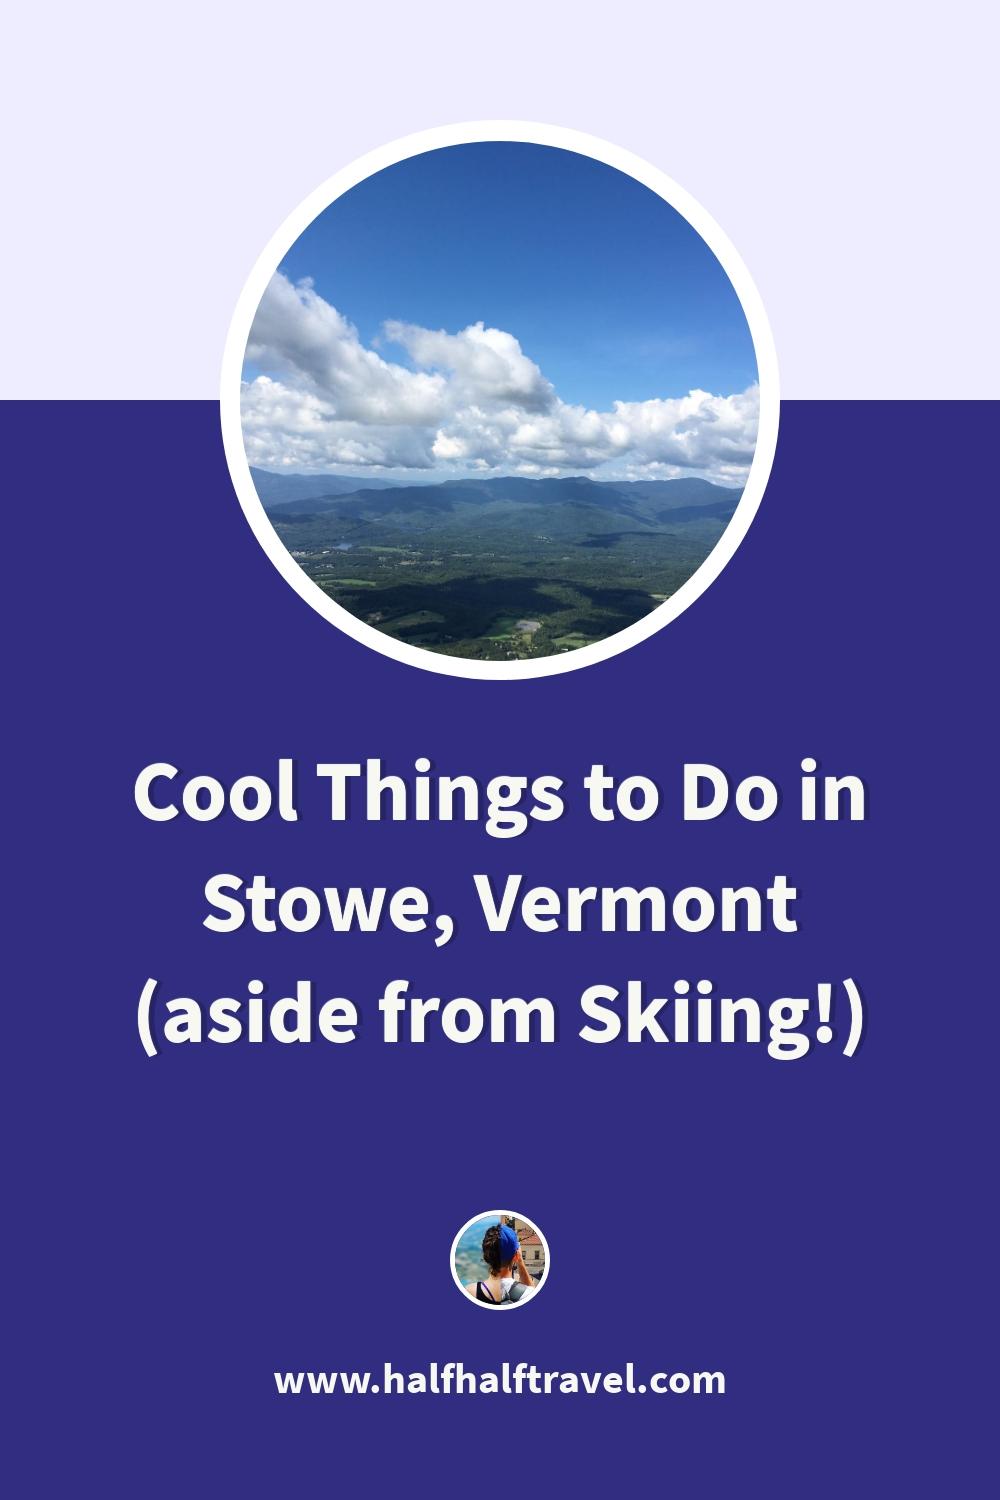 Pinterest image from the '16 Cool Things to Do in Stowe, Vermont (aside from skiing!)' article on Half Half Travel